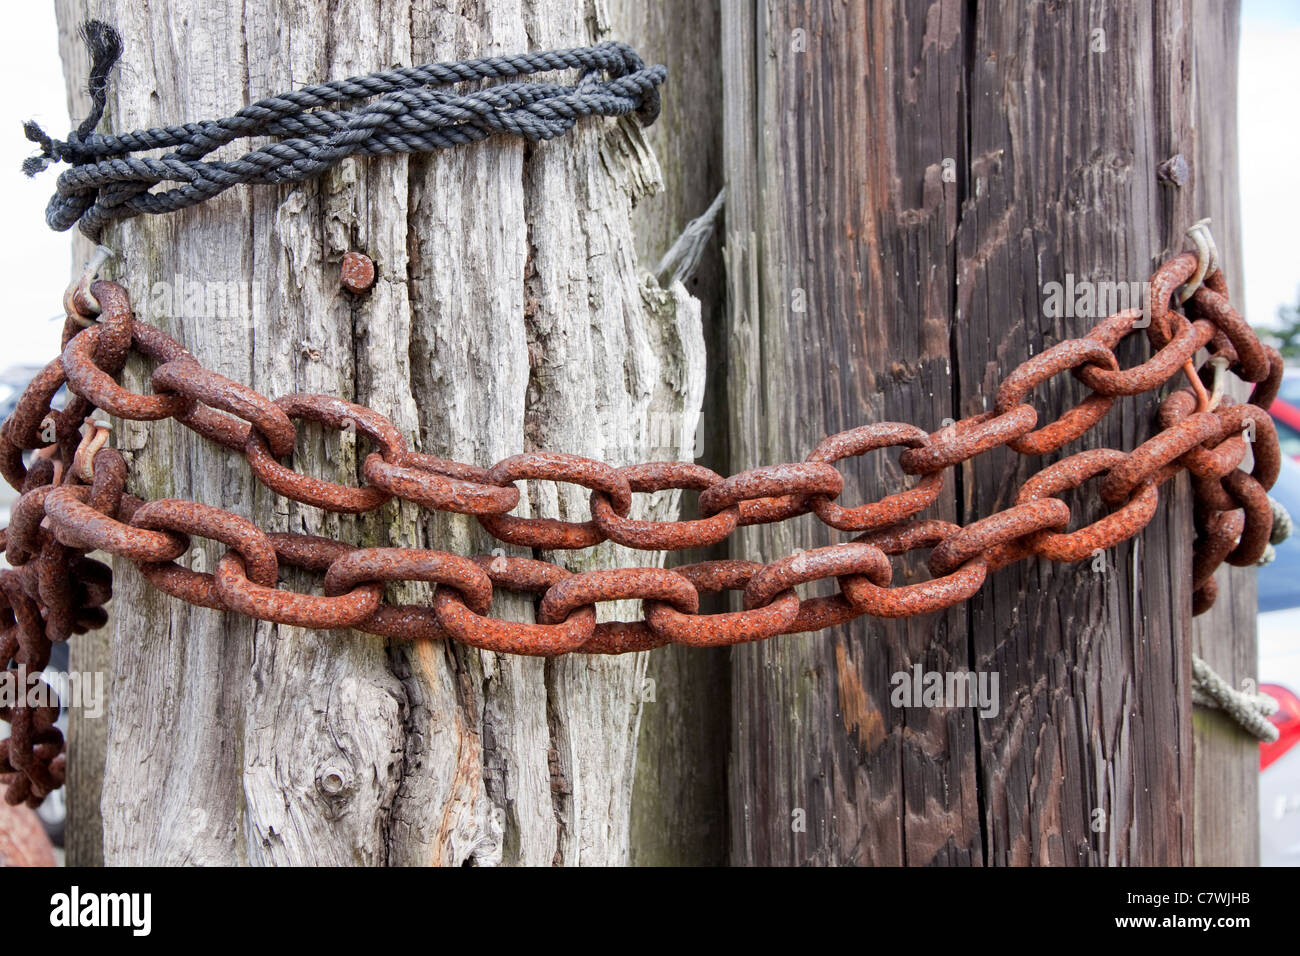 Rusty chain links on wooden poles. Stock Photo